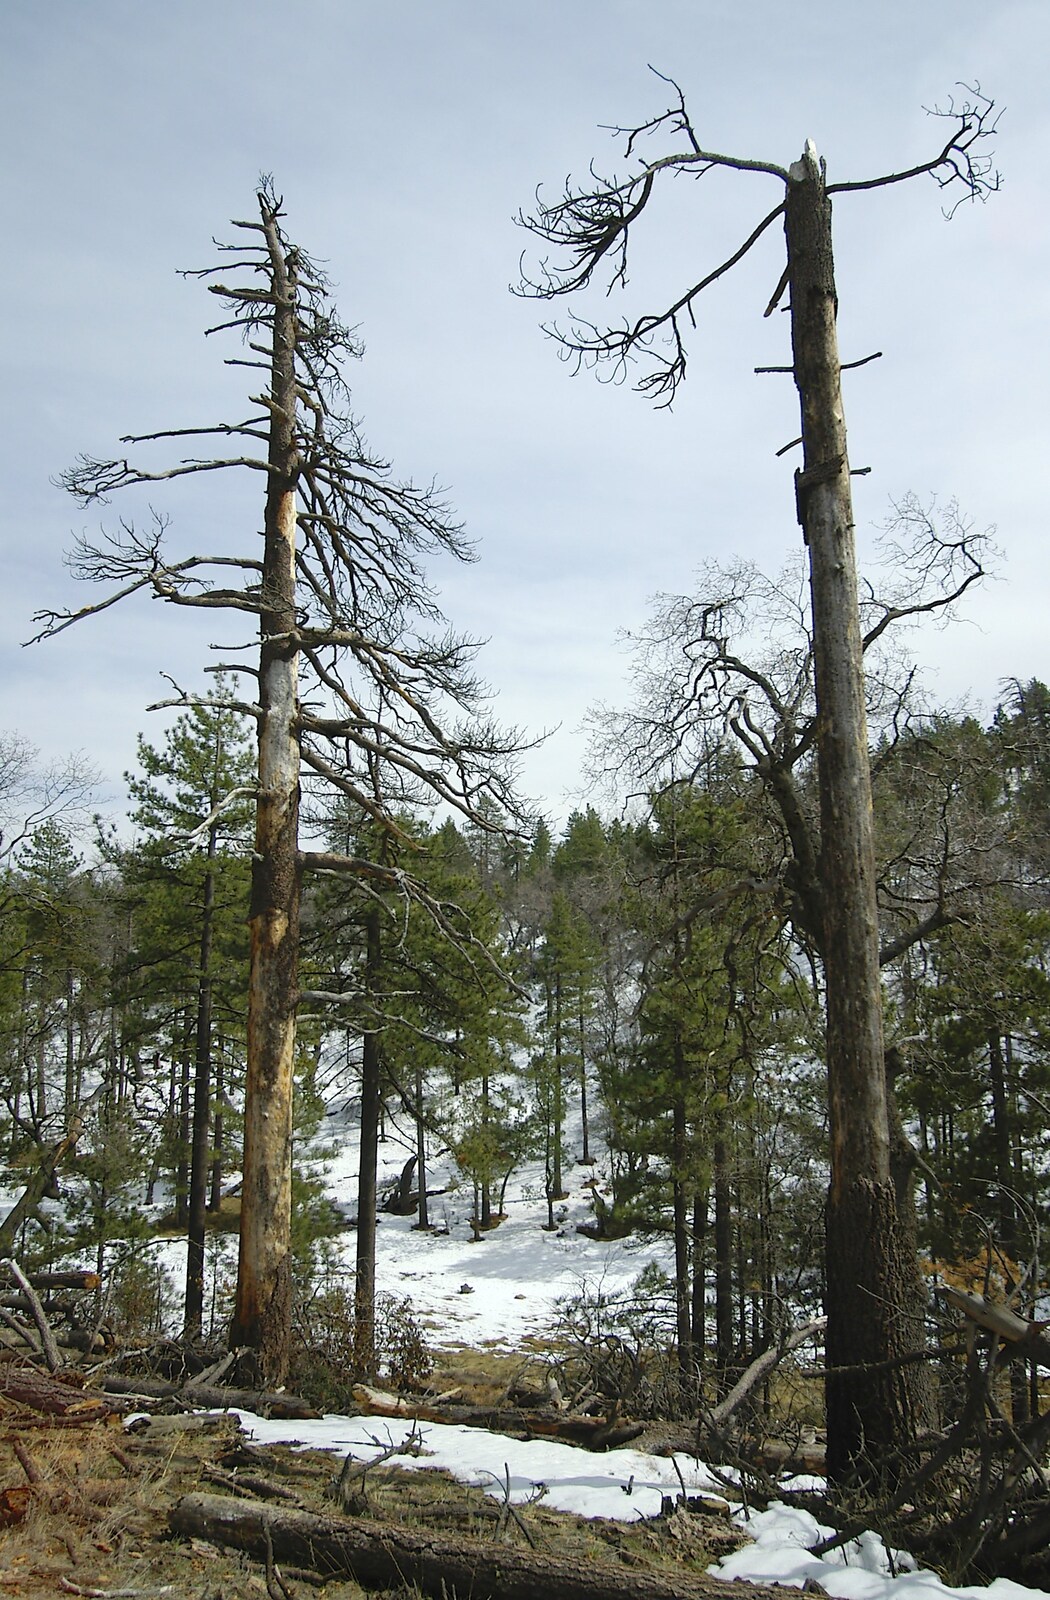 Skeleton trees from California Snow: San Bernadino State Forest, California, US - 26th March 2006